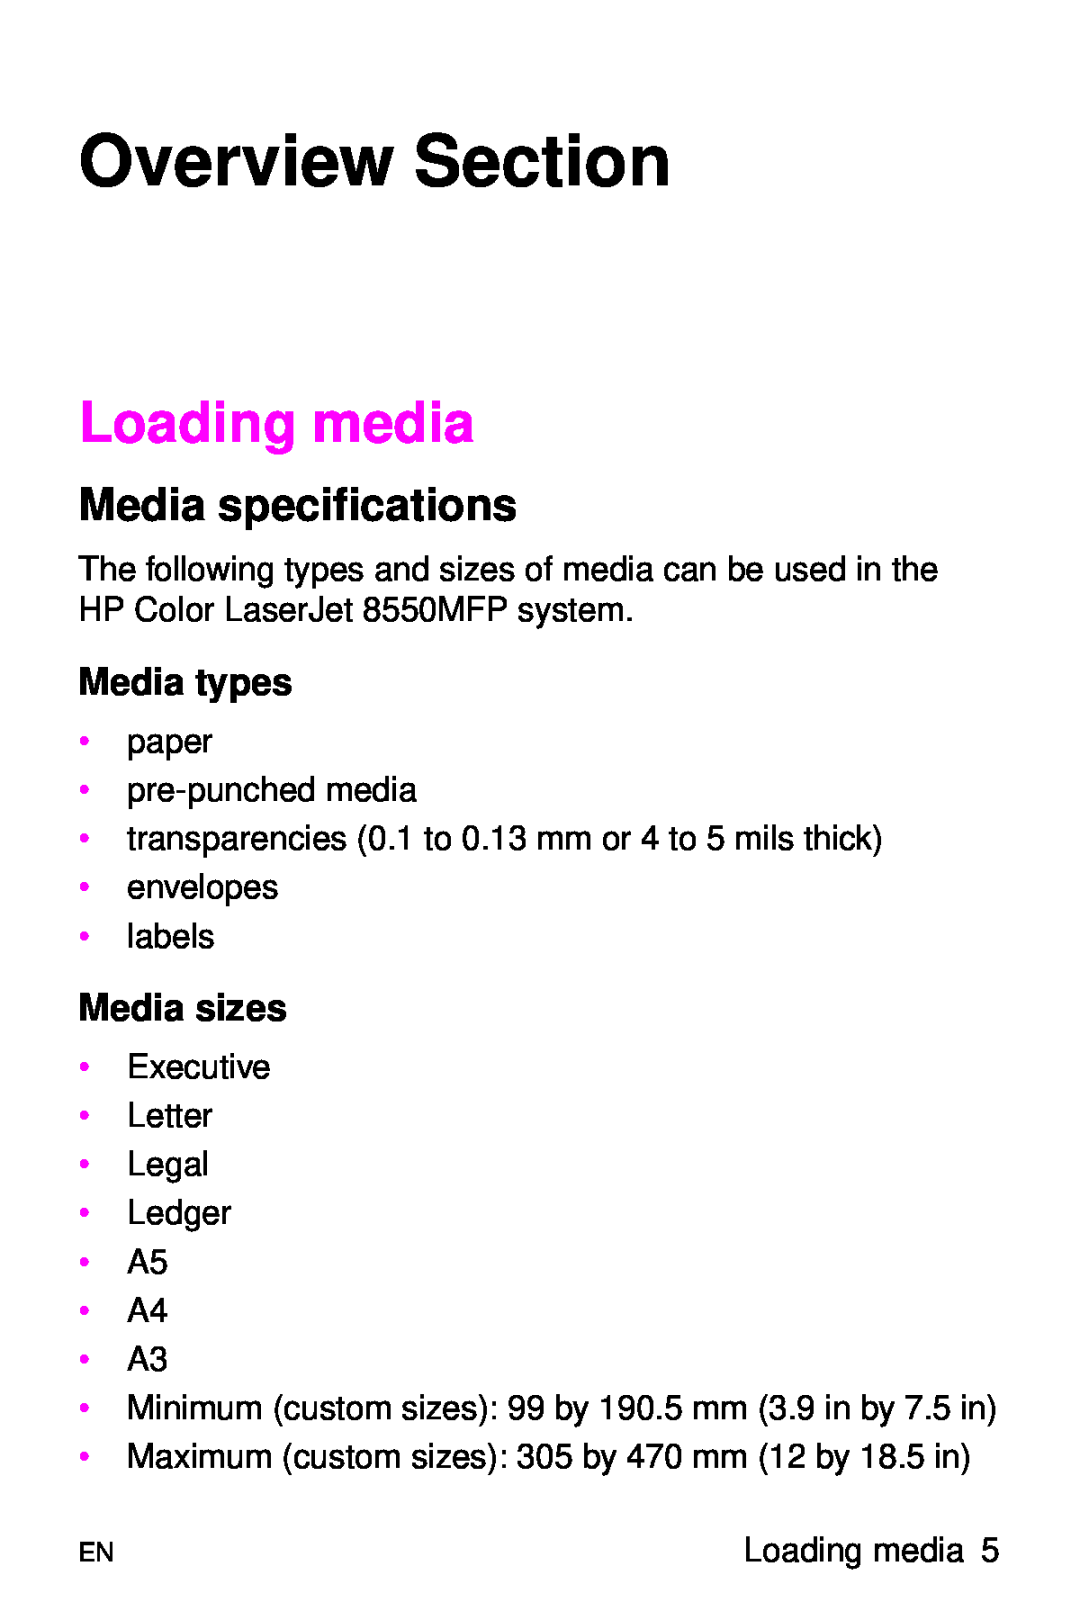 HP 8000 s manual Overview Section, Loading media, Media specifications, Media types, Media sizes 